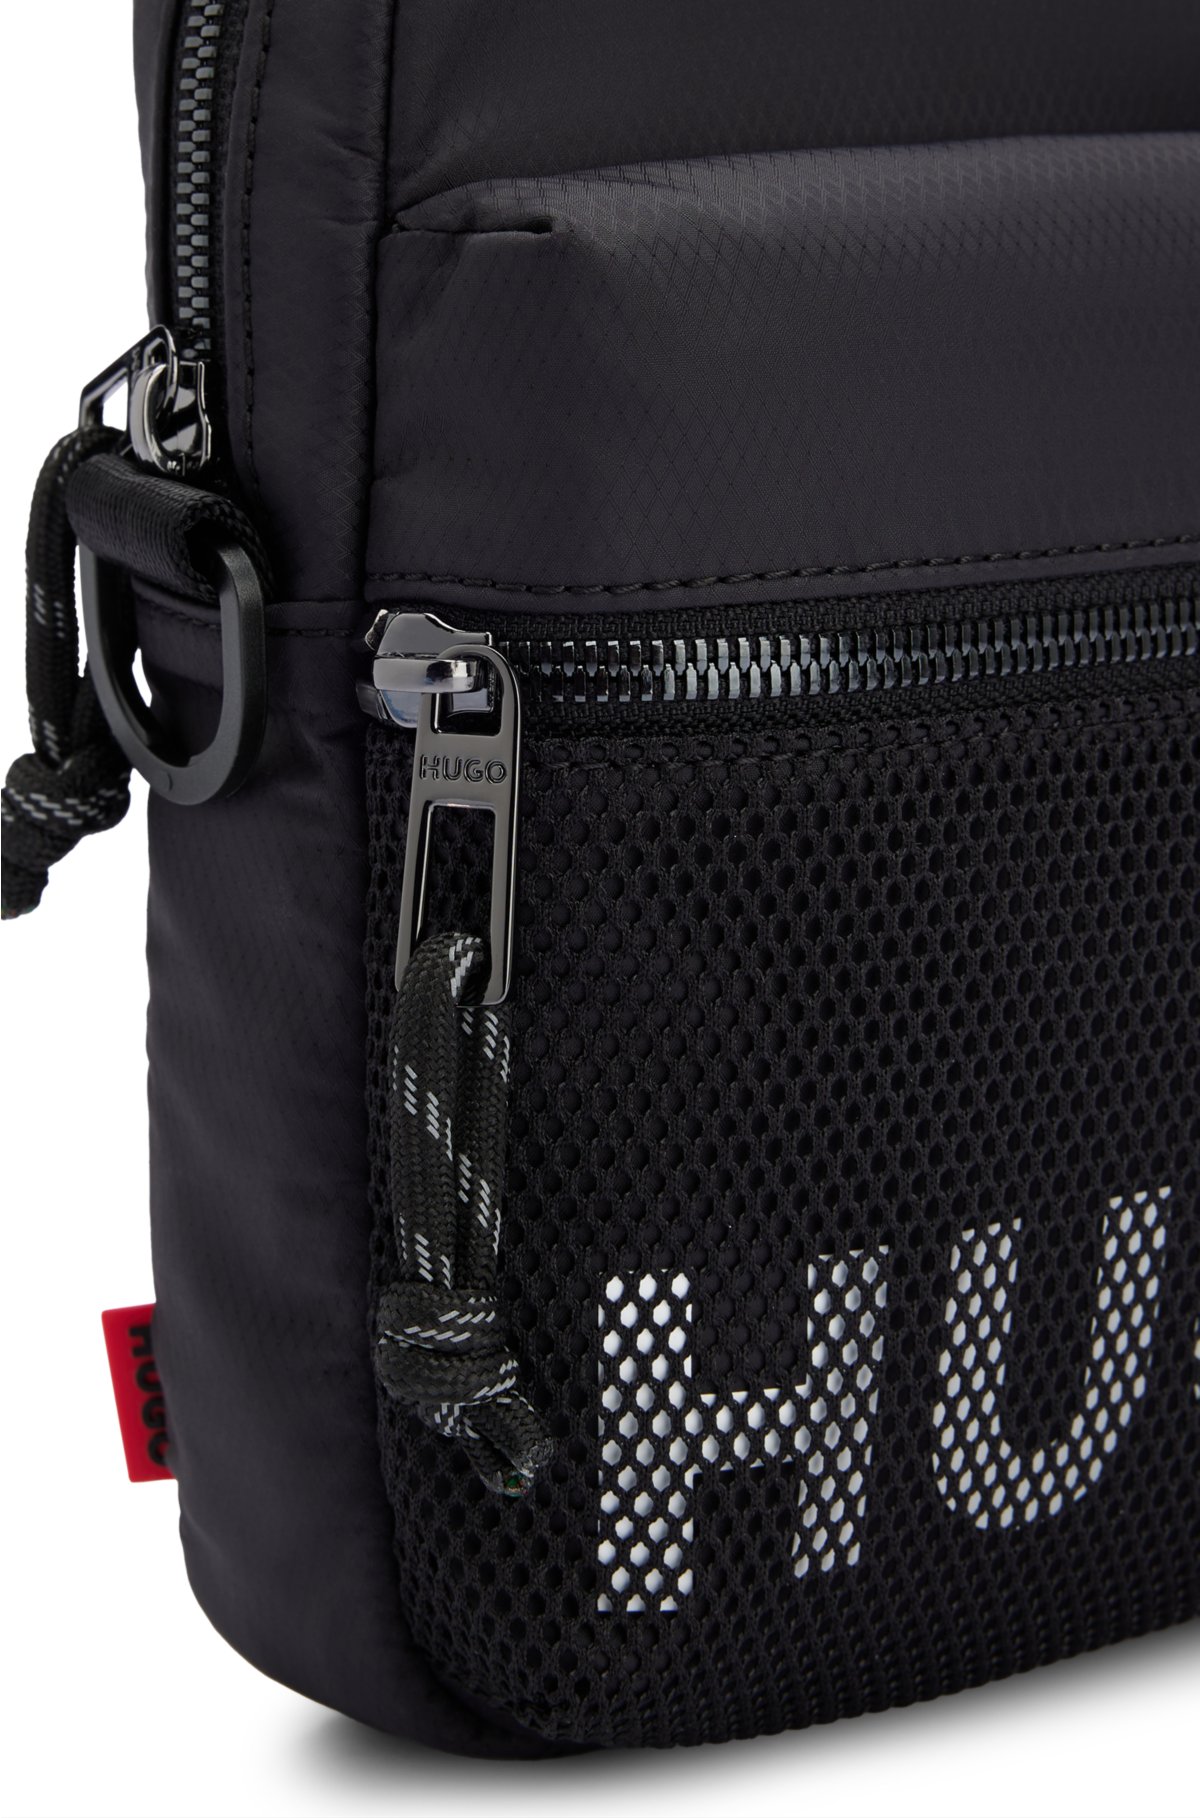 Reporter bag with contrast logo and mesh overlay, Black